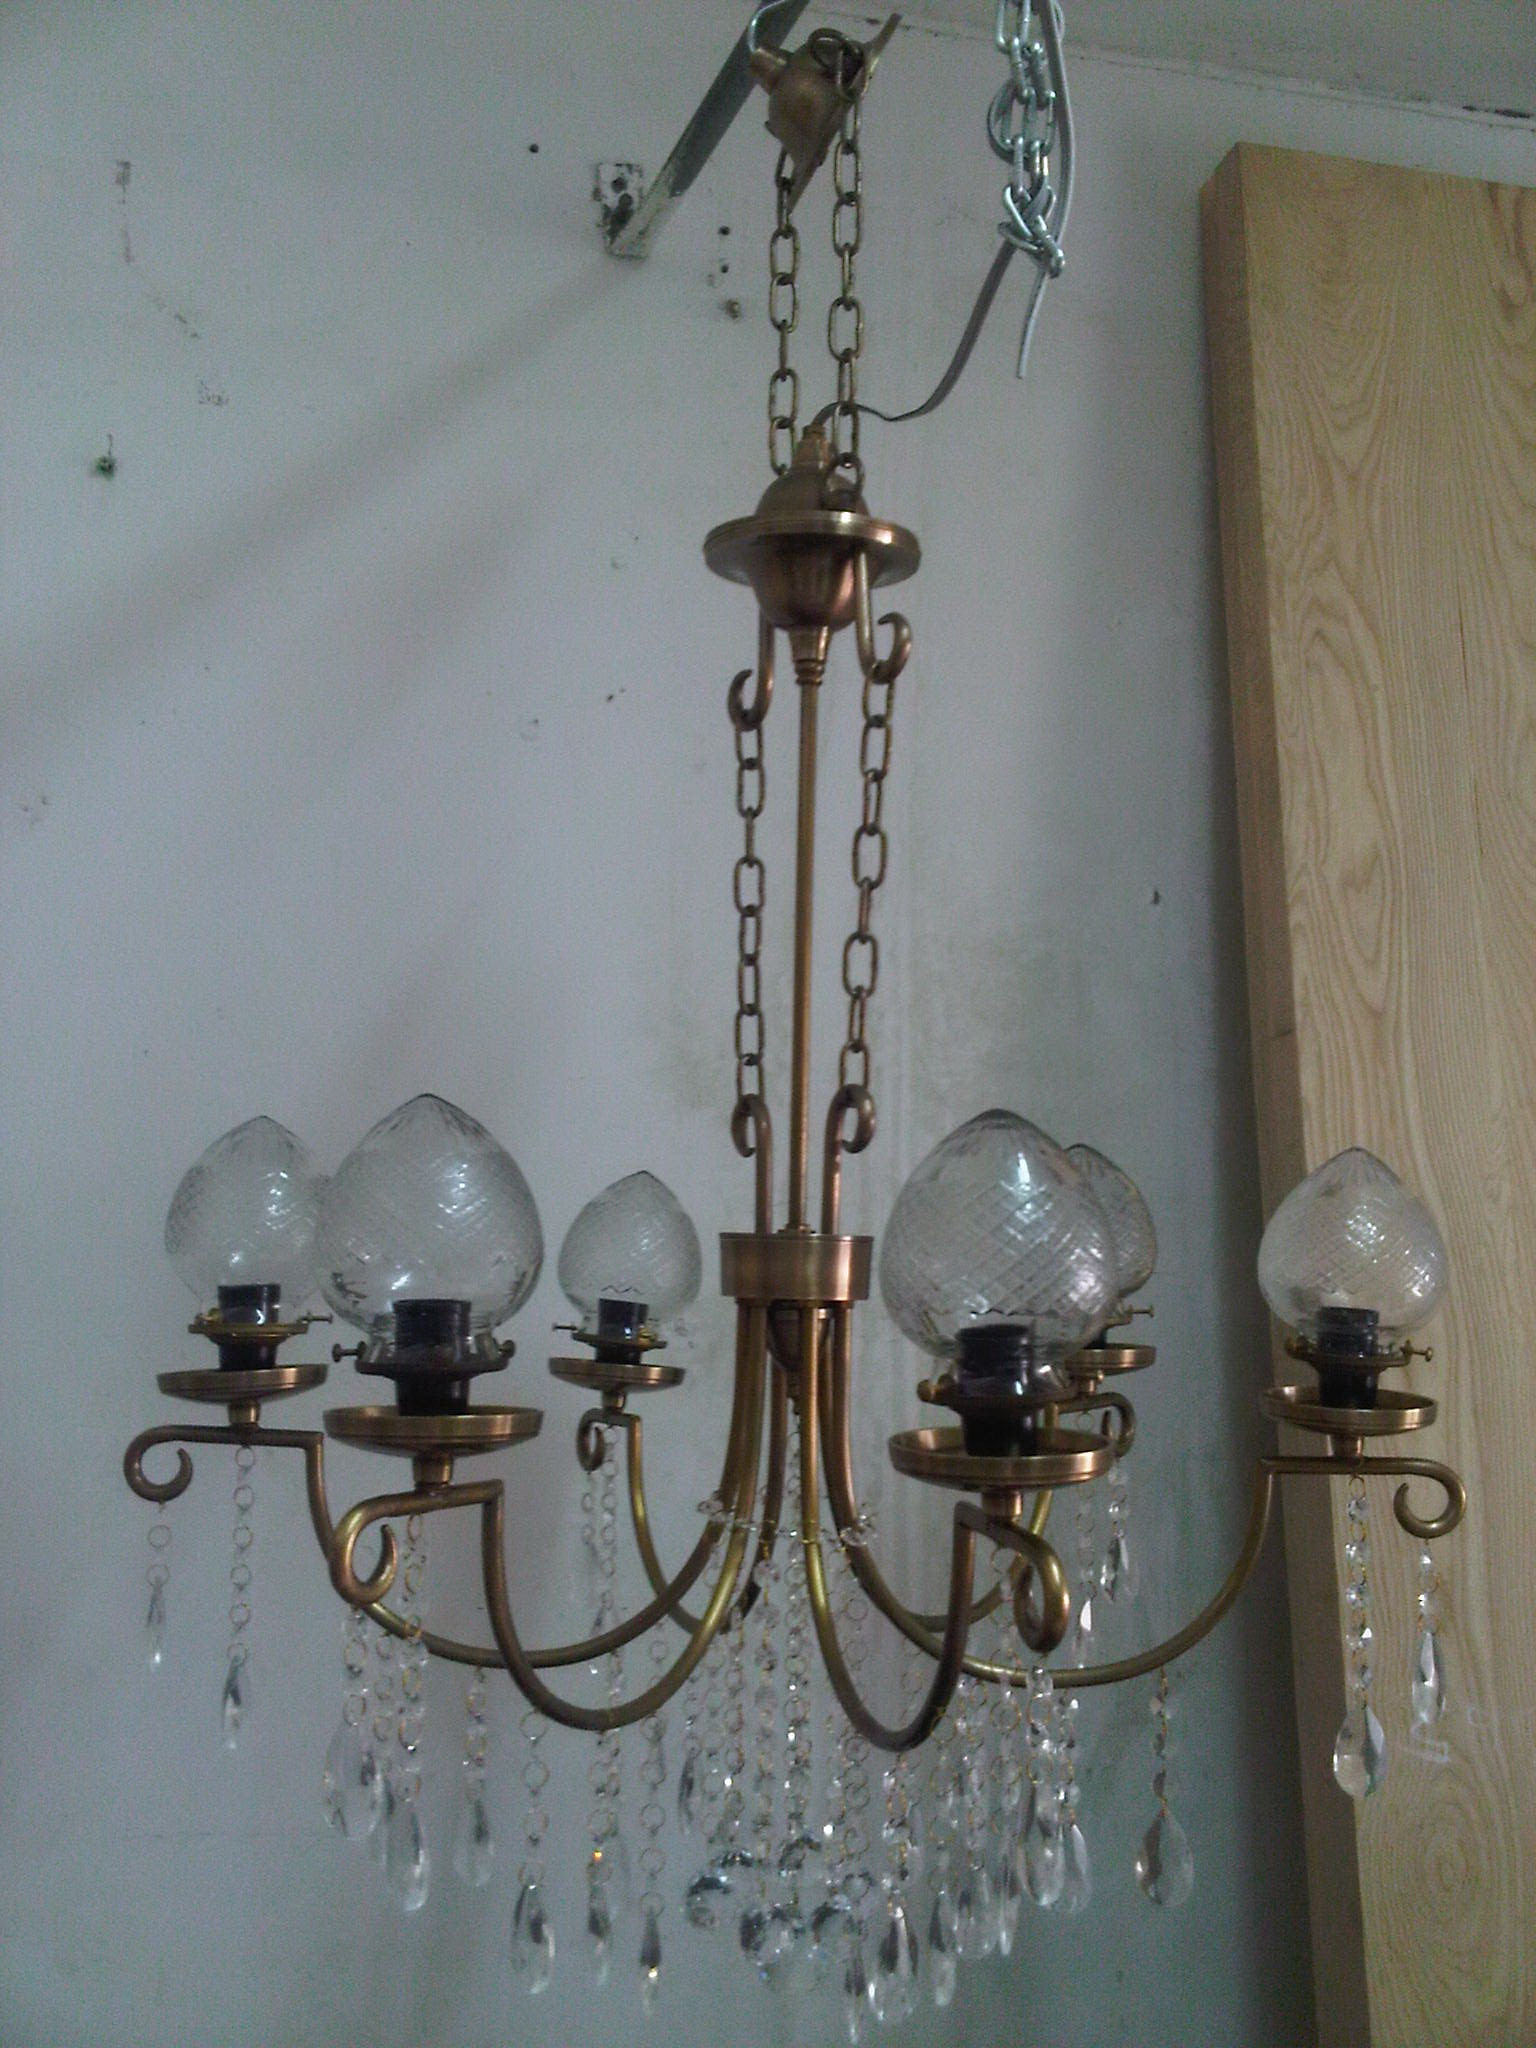 Chandelier Lamp Item brass with crystal  Code HGL6MM 6 arm classic lamp